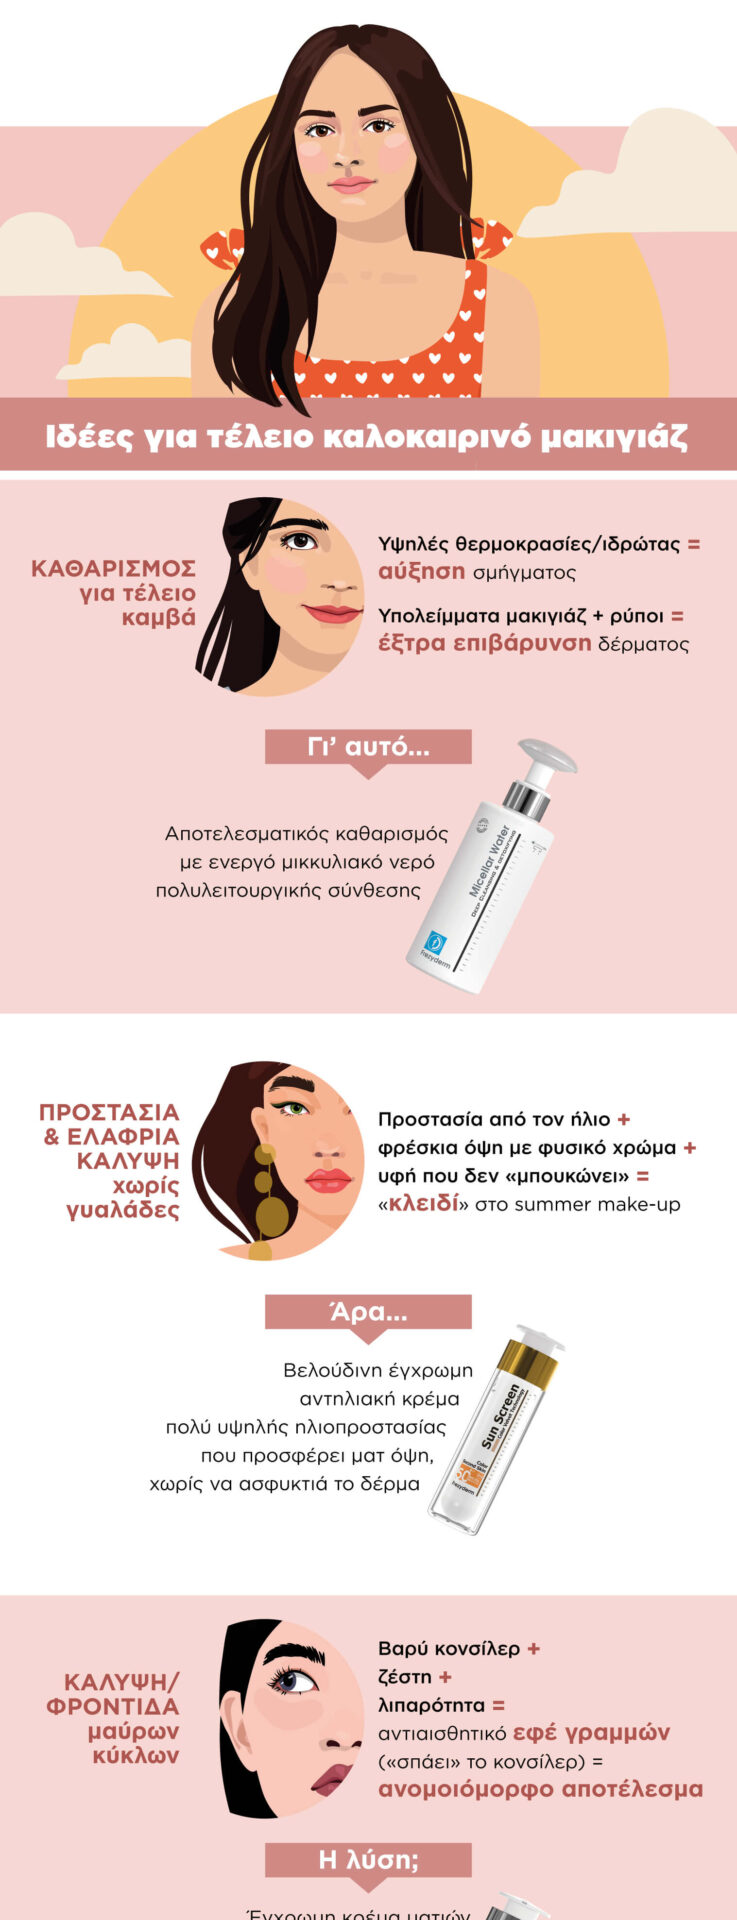 infographic about summer make up